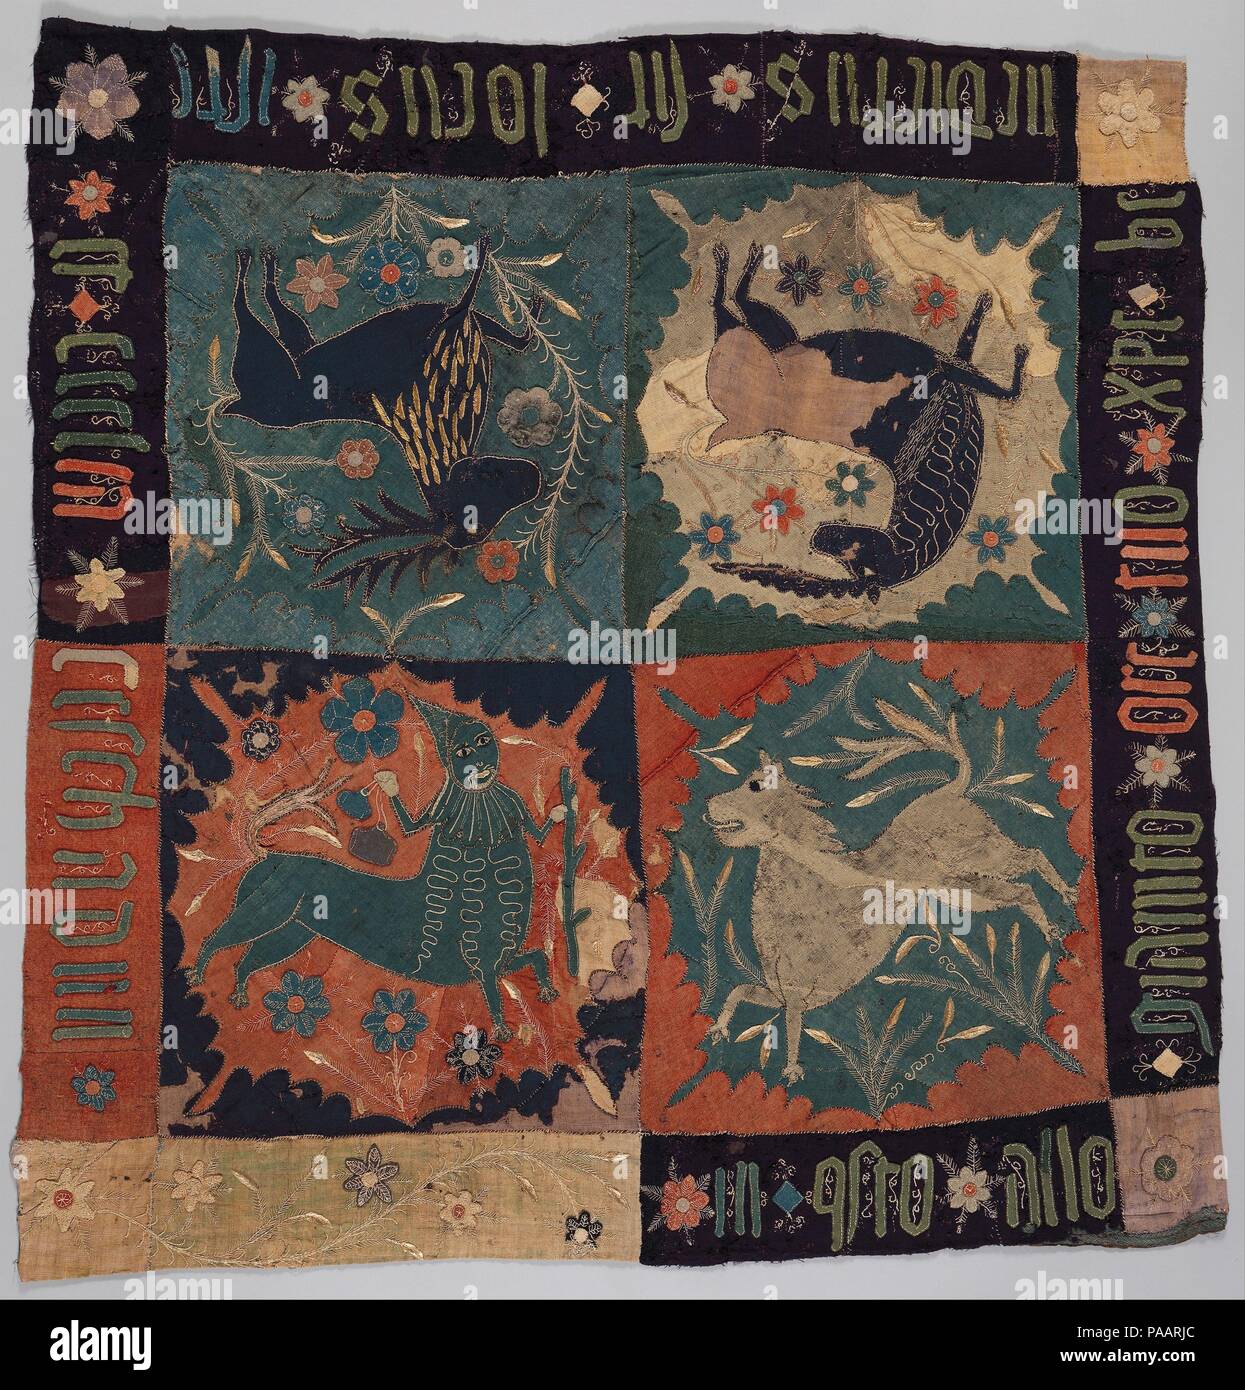 Textile Fragment with Unicorn, Deer, Centaur and Lion. Culture: Scandinavian. Dimensions: 52 3/4 × 52 3/8 in. (134 × 133 cm)  Framed: 57 3/4 × 57 1/4 × 4 1/8 in. (146.7 × 145.4 × 10.5 cm). Date: ca. 1500.  Like the cloth from Perugia seen here, this textile features a combination of real and imaginary creatures. The inscription, only partially legible and apparently mixing Latin and Italian, invokes the name of Christ and the Church, indicating the cloth's original use in a religious context. Museum: Metropolitan Museum of Art, New York, USA. Stock Photo